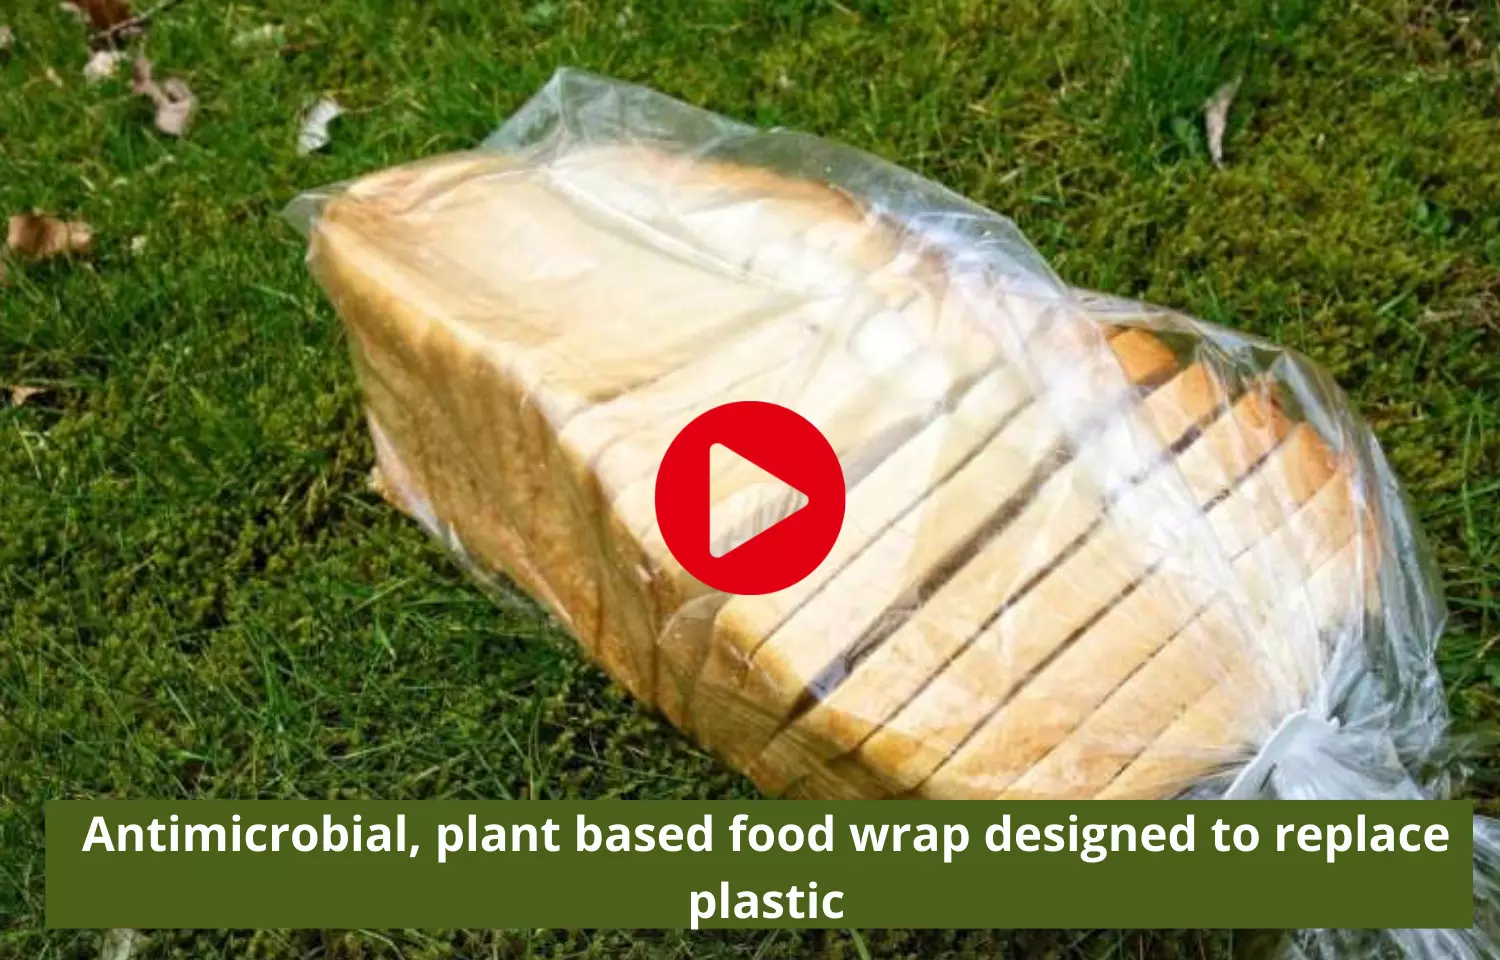 Antimicrobial, plant based food wrap designed to replace plastic